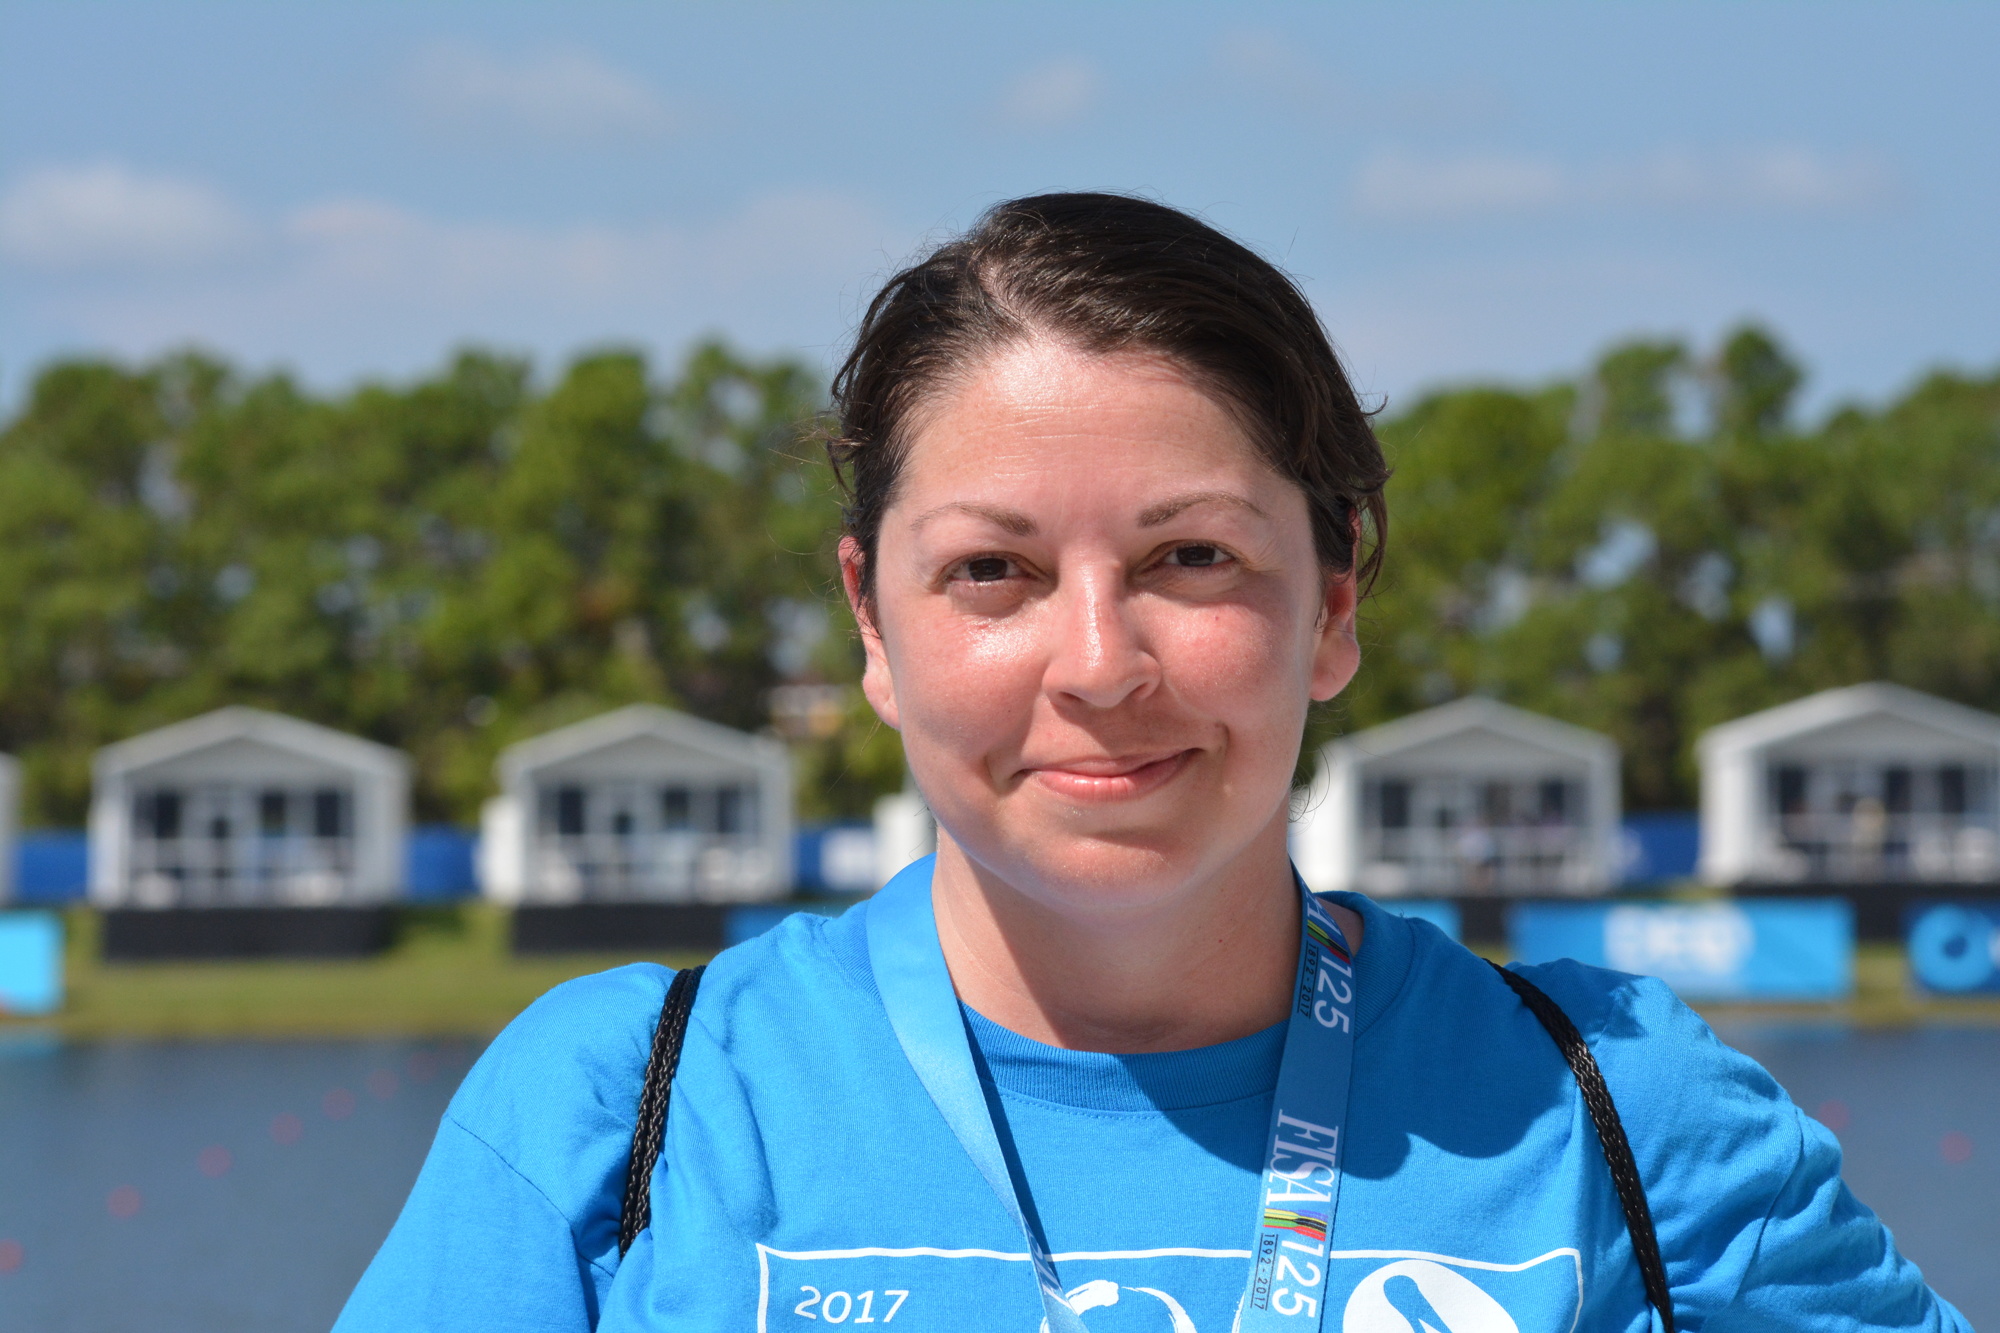 Palm Aire's Dianne Fisher  is the captain of the access control team at the championships.